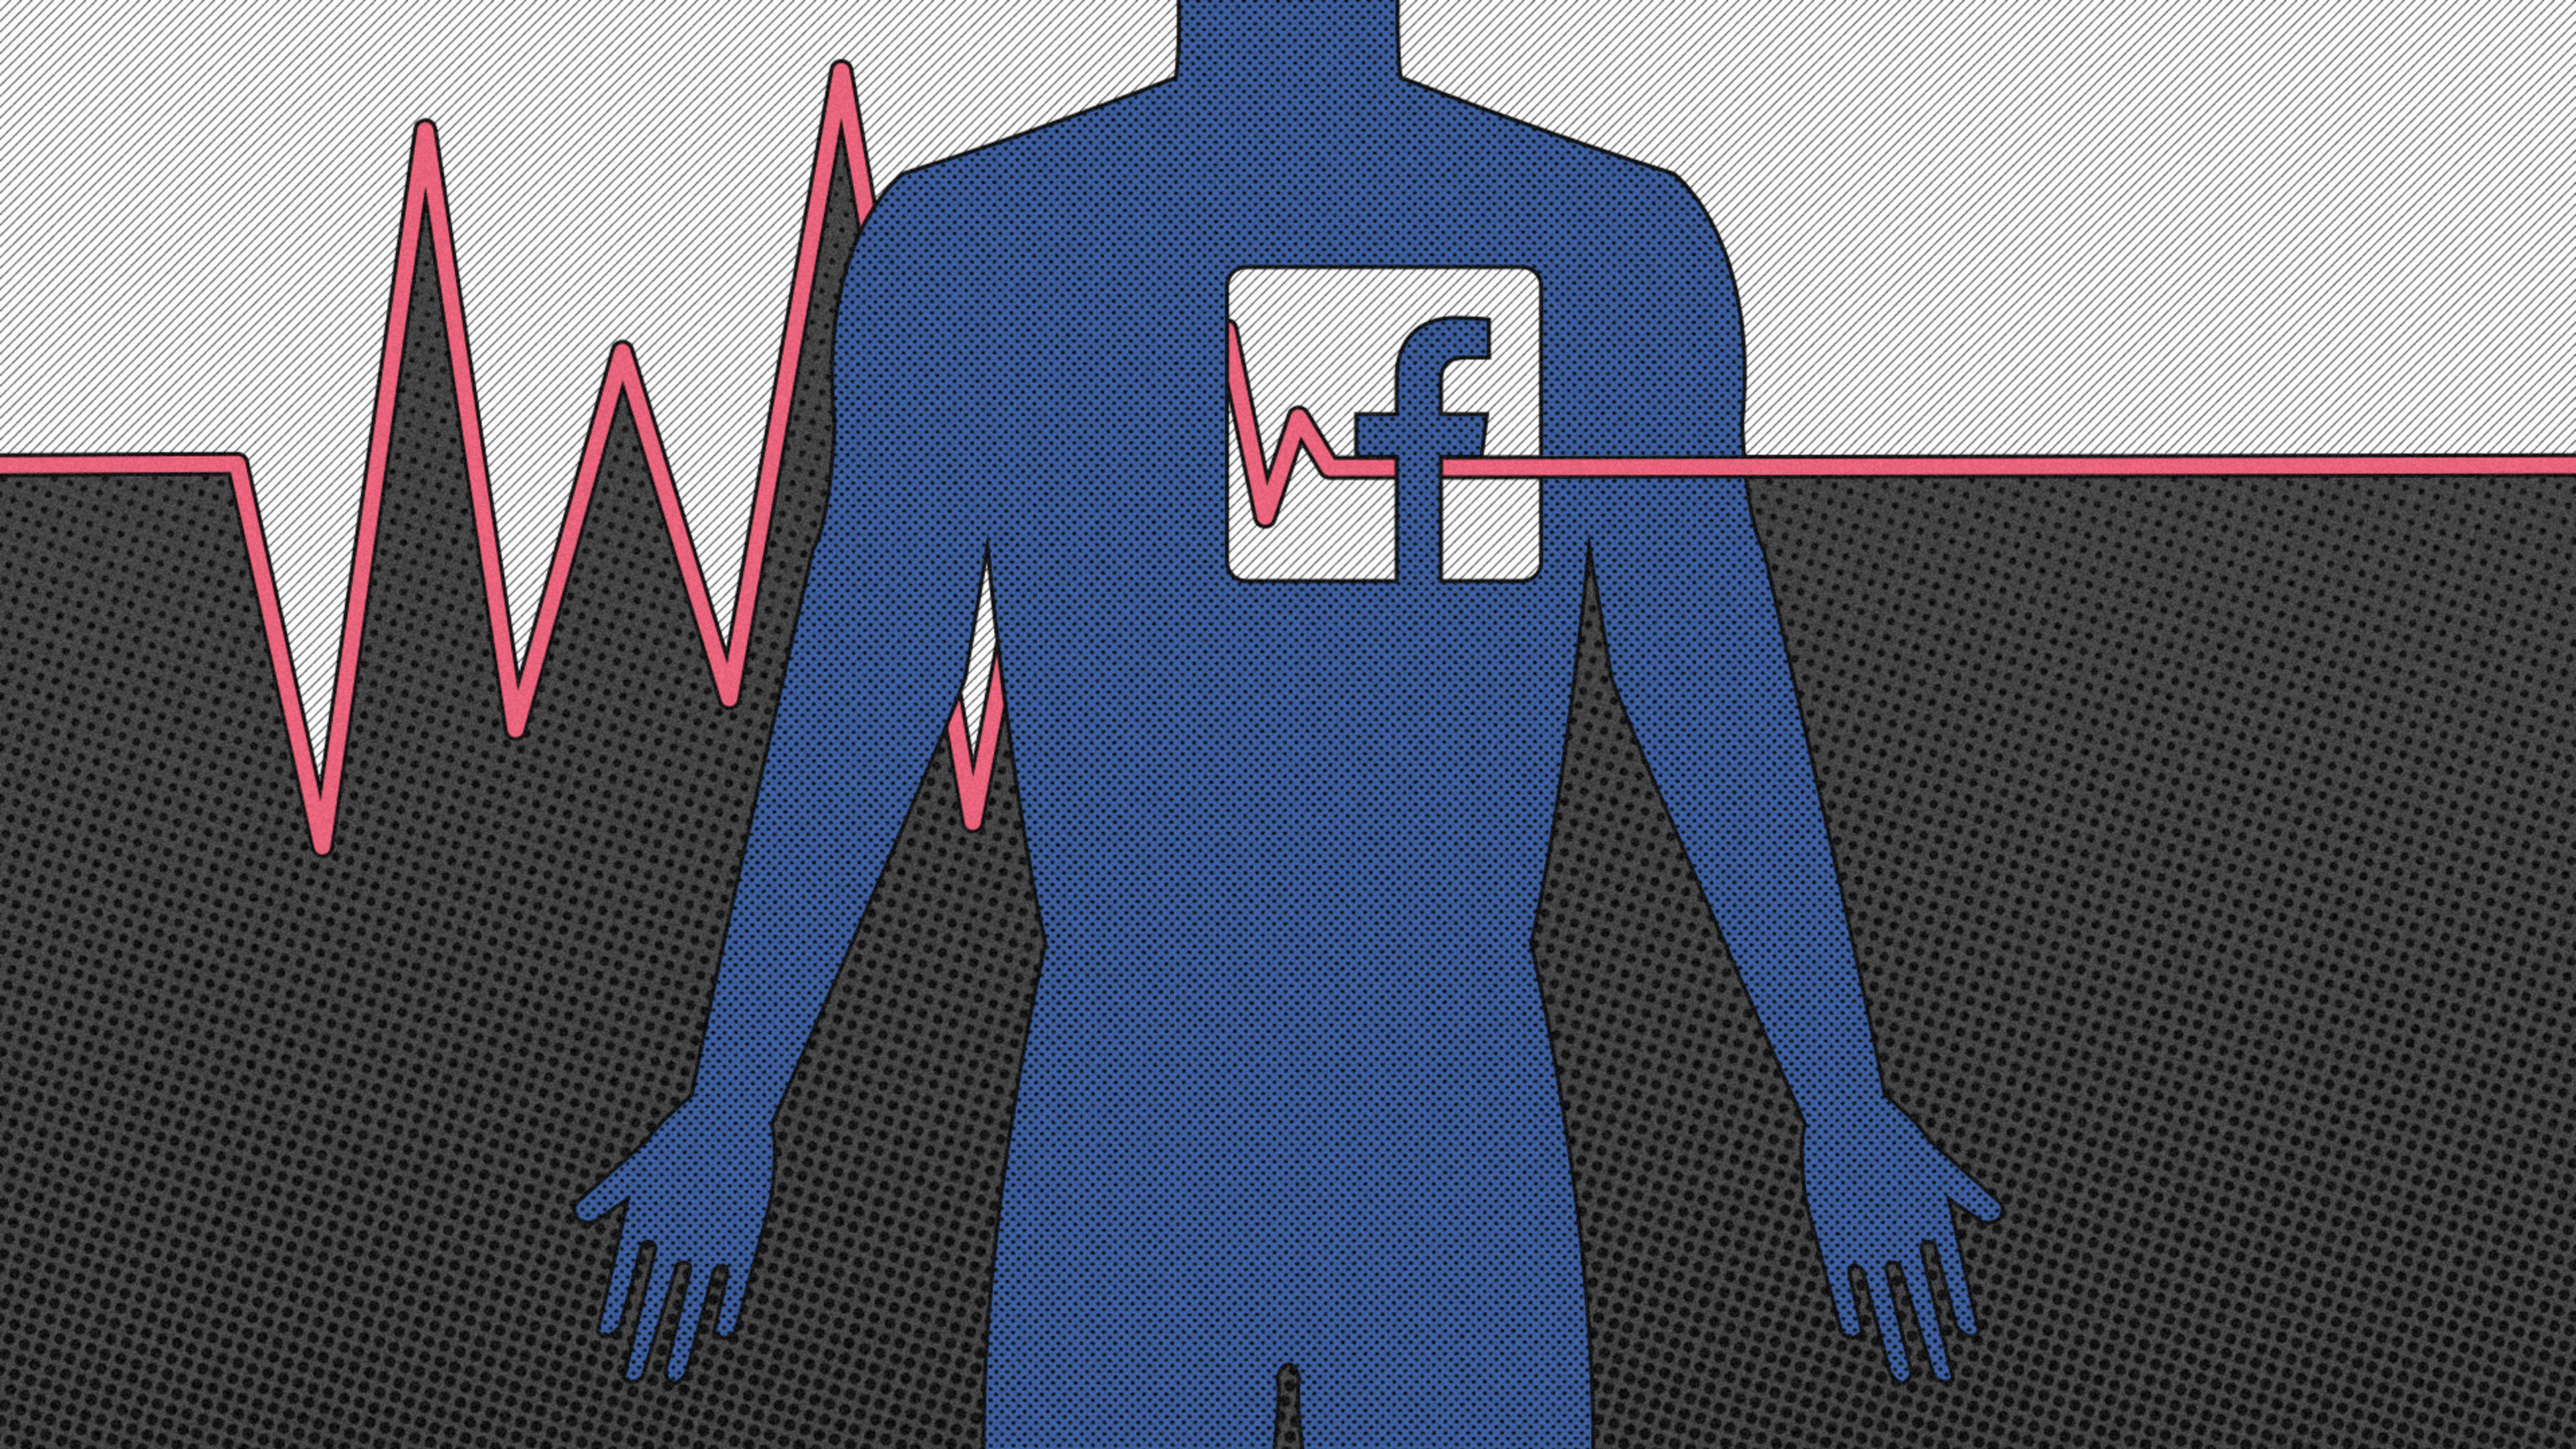 Facebook may be making you feel less healthy